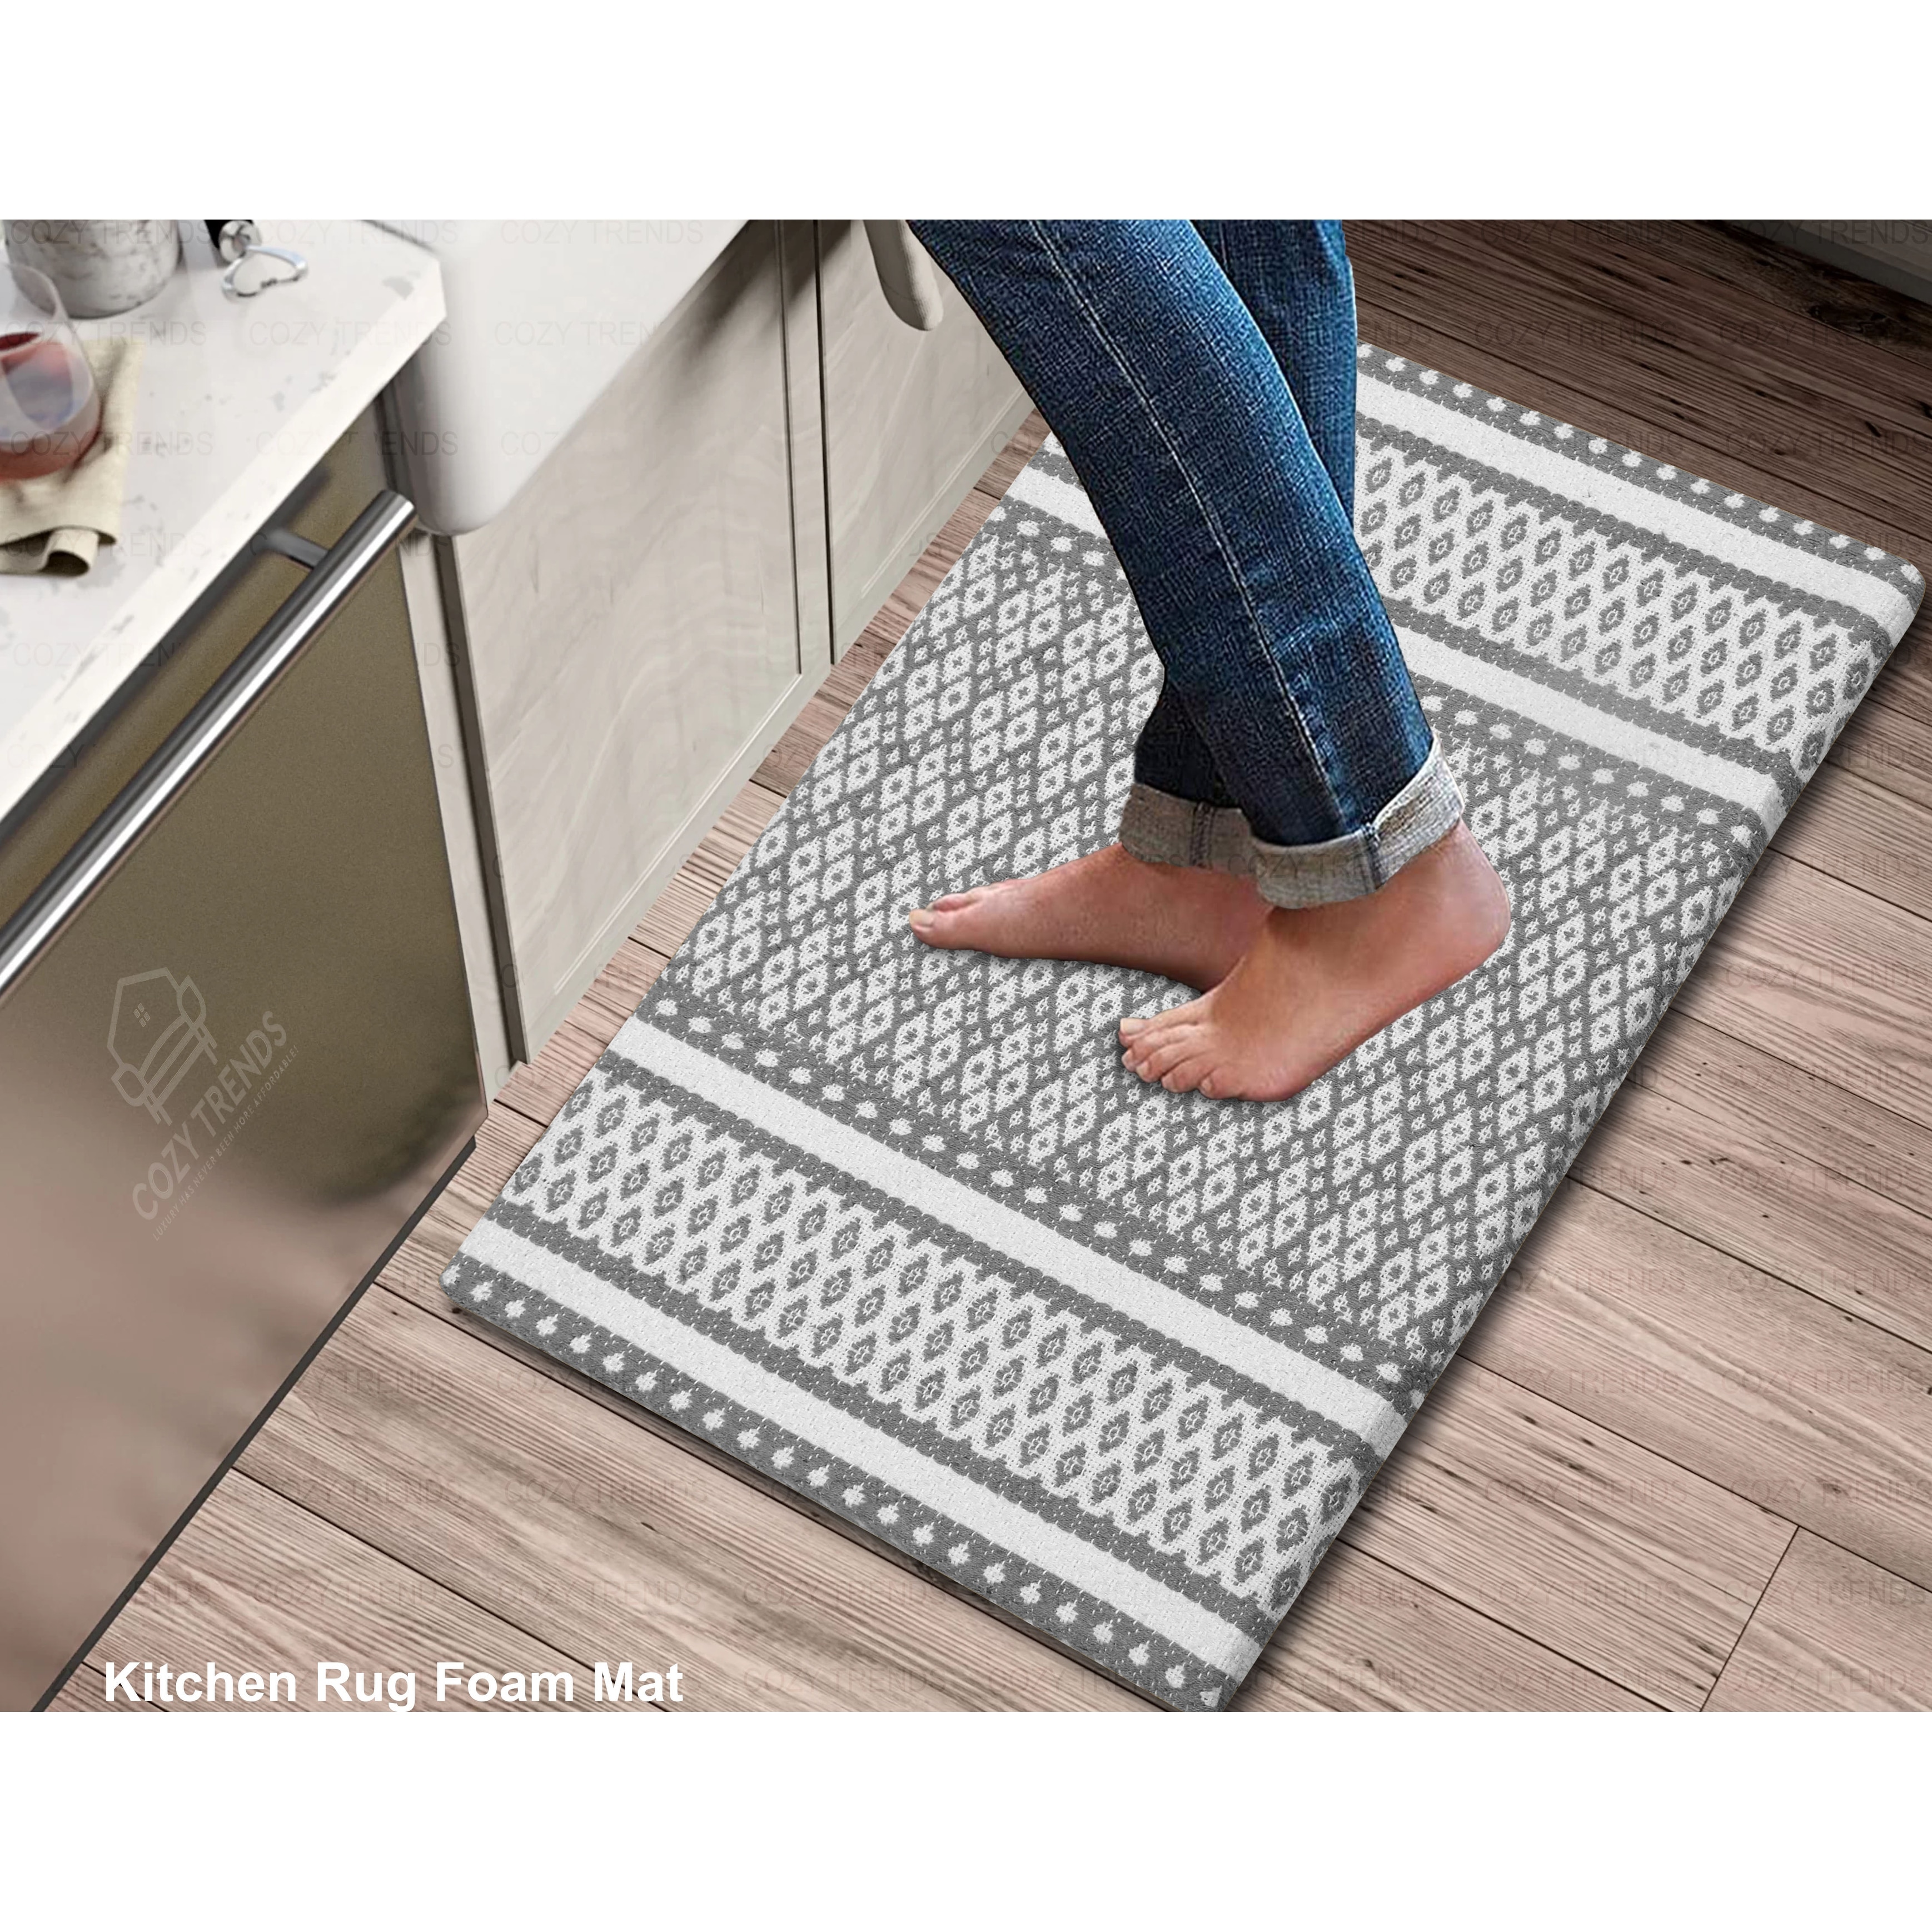 https://ak1.ostkcdn.com/images/products/is/images/direct/33347cfe421e0c20e54525af819520adf4ee0abb/Woven-Cotton-Anti-Fatigue-Cushioned-Kitchen-%7C-Doormat-%7C-Bathroom-18%22-x-30%22-Mats-With-Foam-Backing-Anti-Slip.jpg